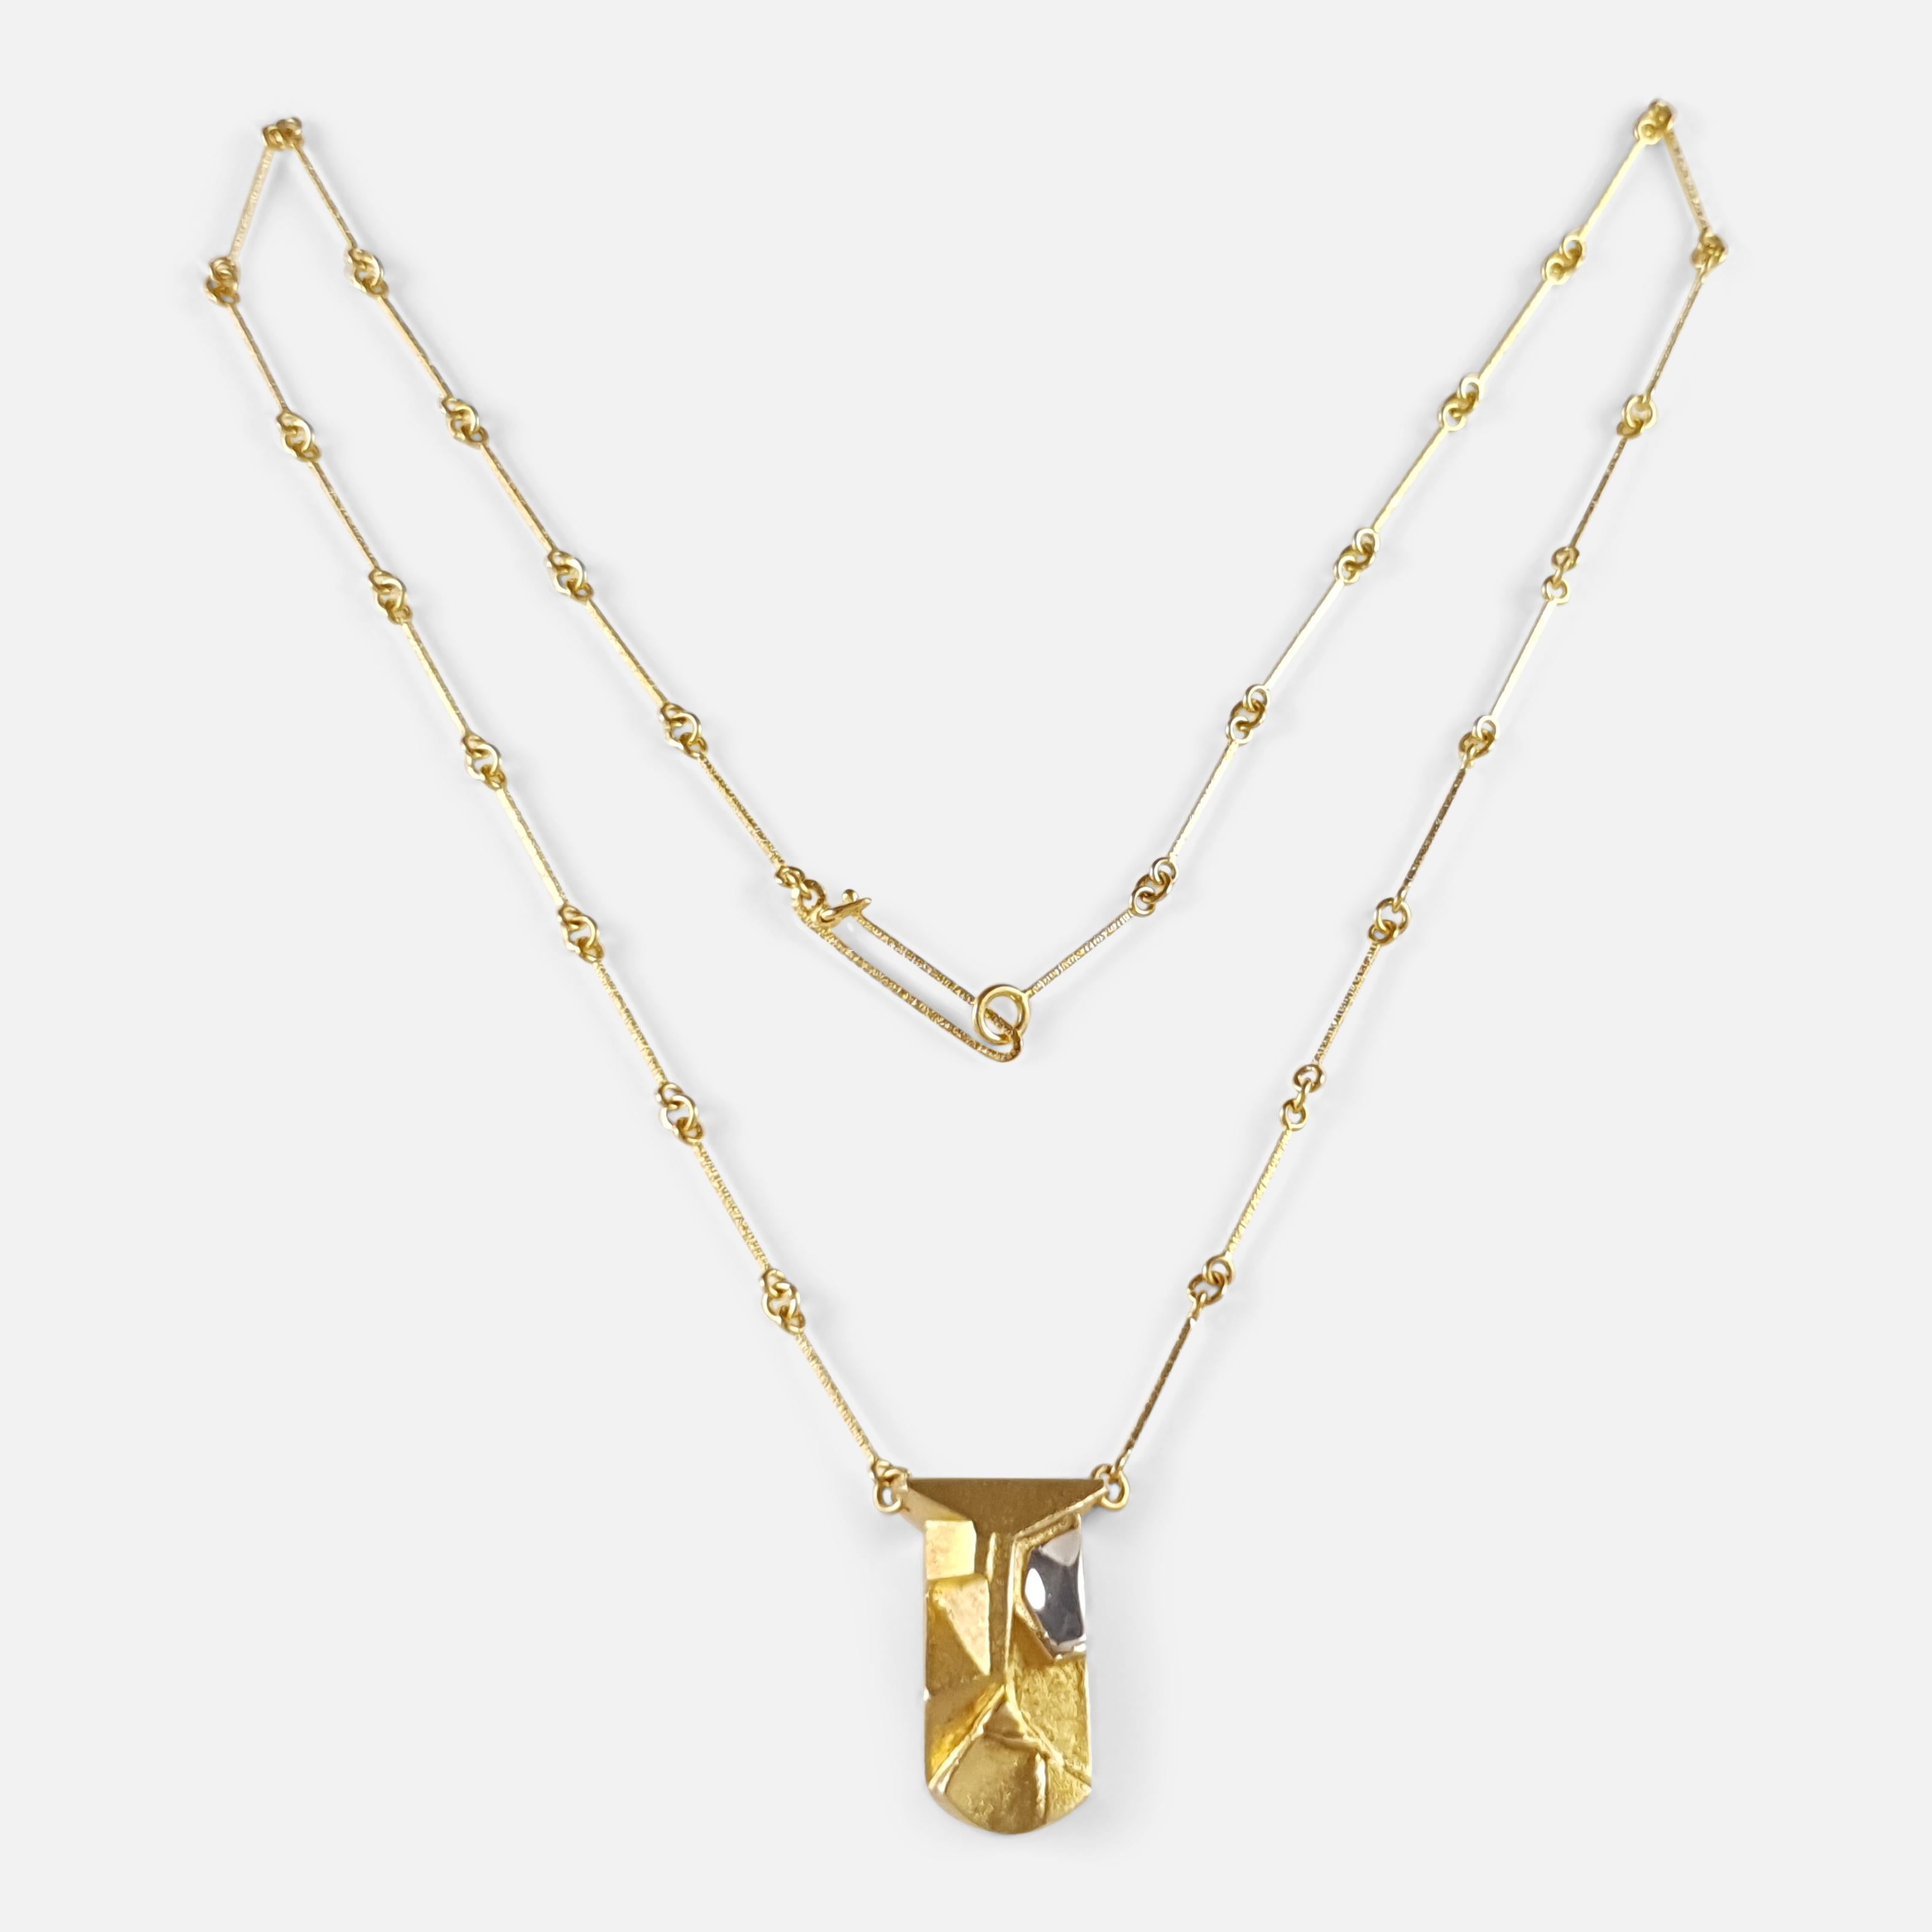 14ct Gold Pendant Necklace, Lapponia For Sale 2